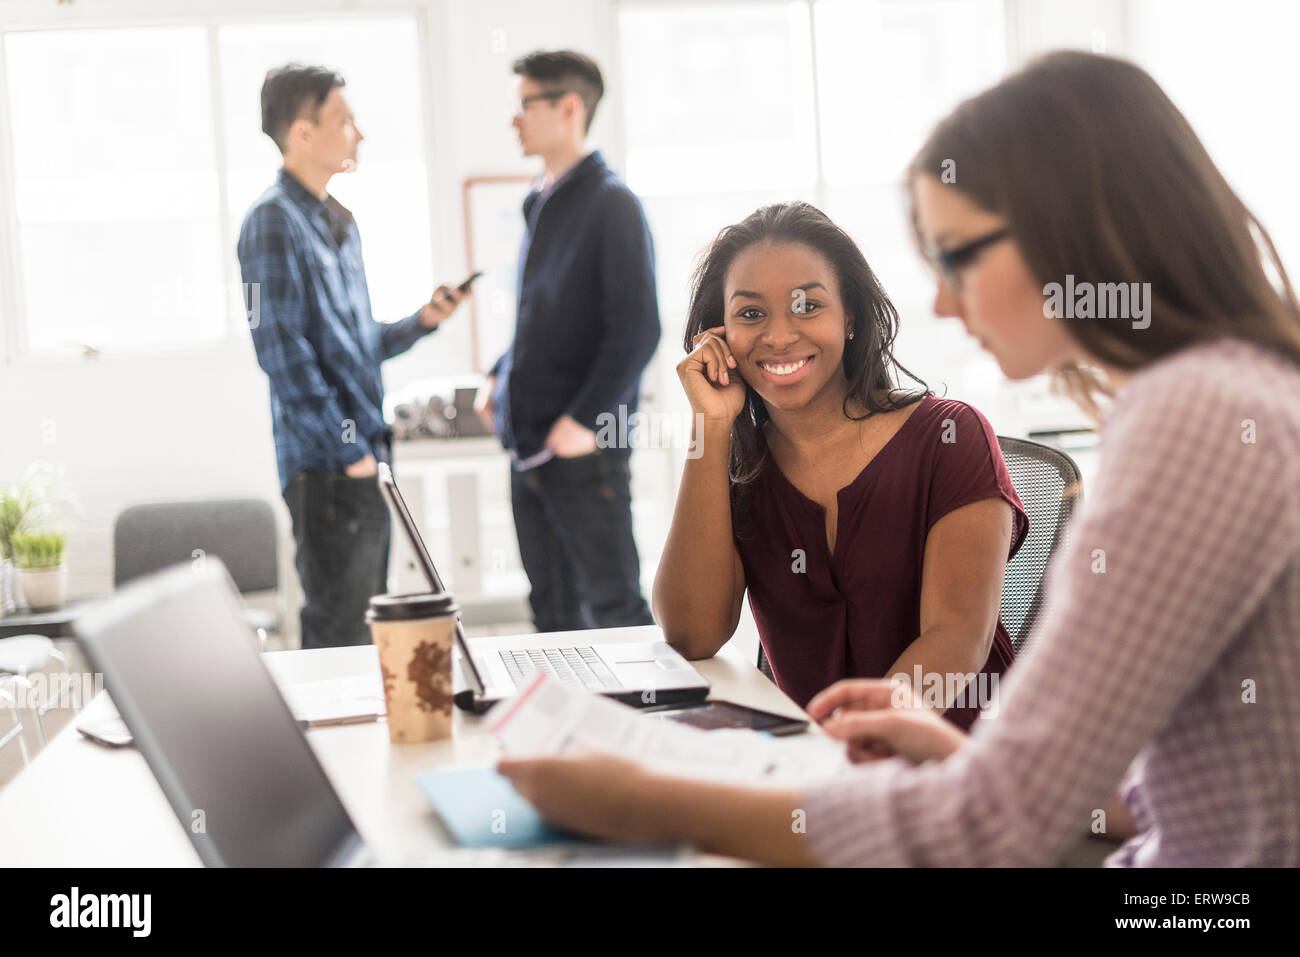 Businesswoman smiling with technology in office Stock Photo